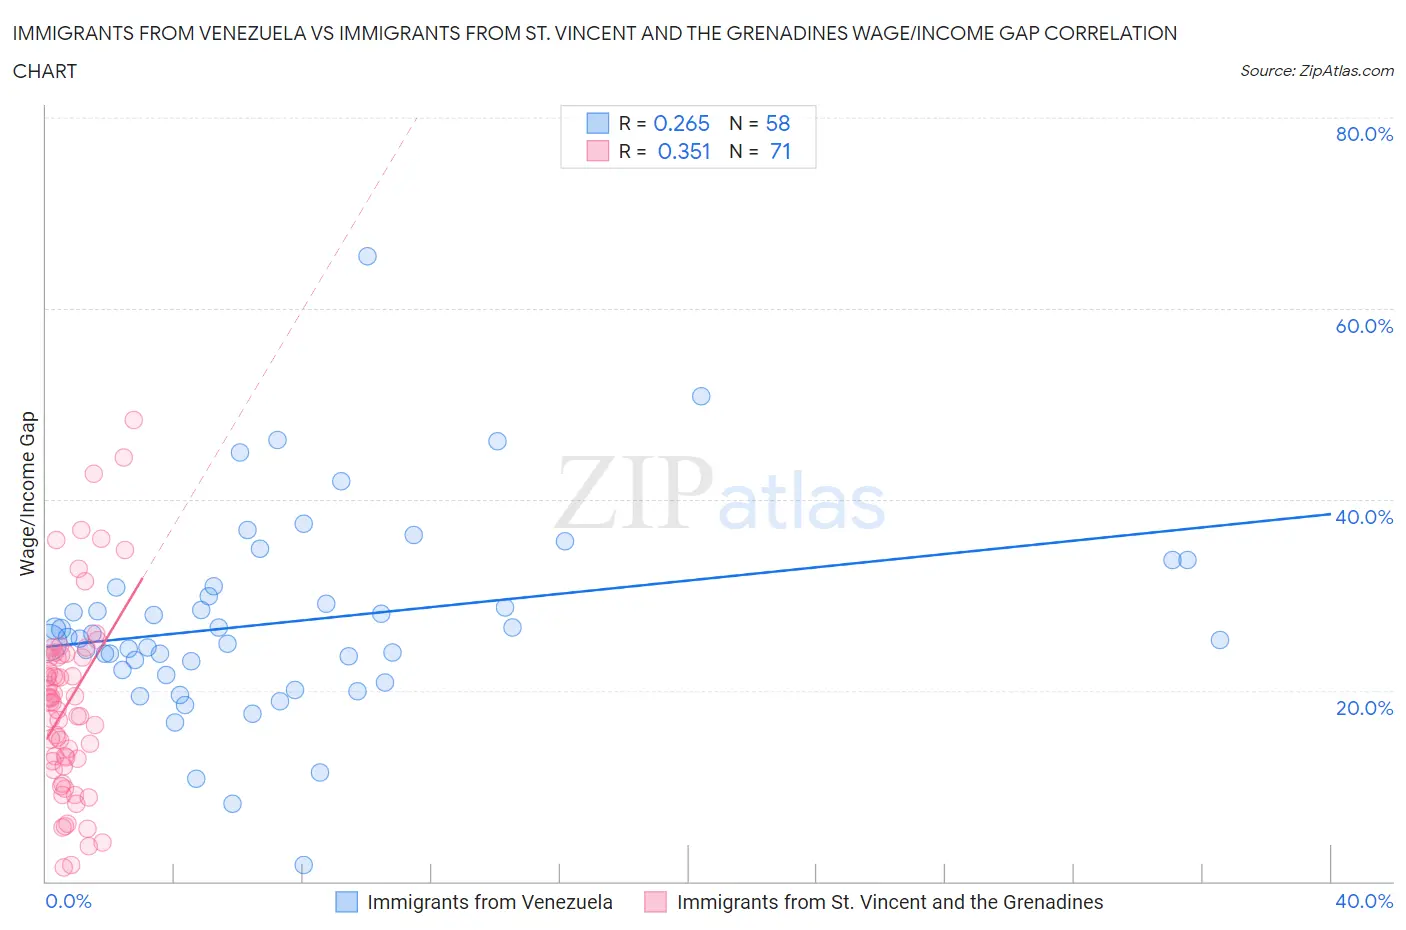 Immigrants from Venezuela vs Immigrants from St. Vincent and the Grenadines Wage/Income Gap